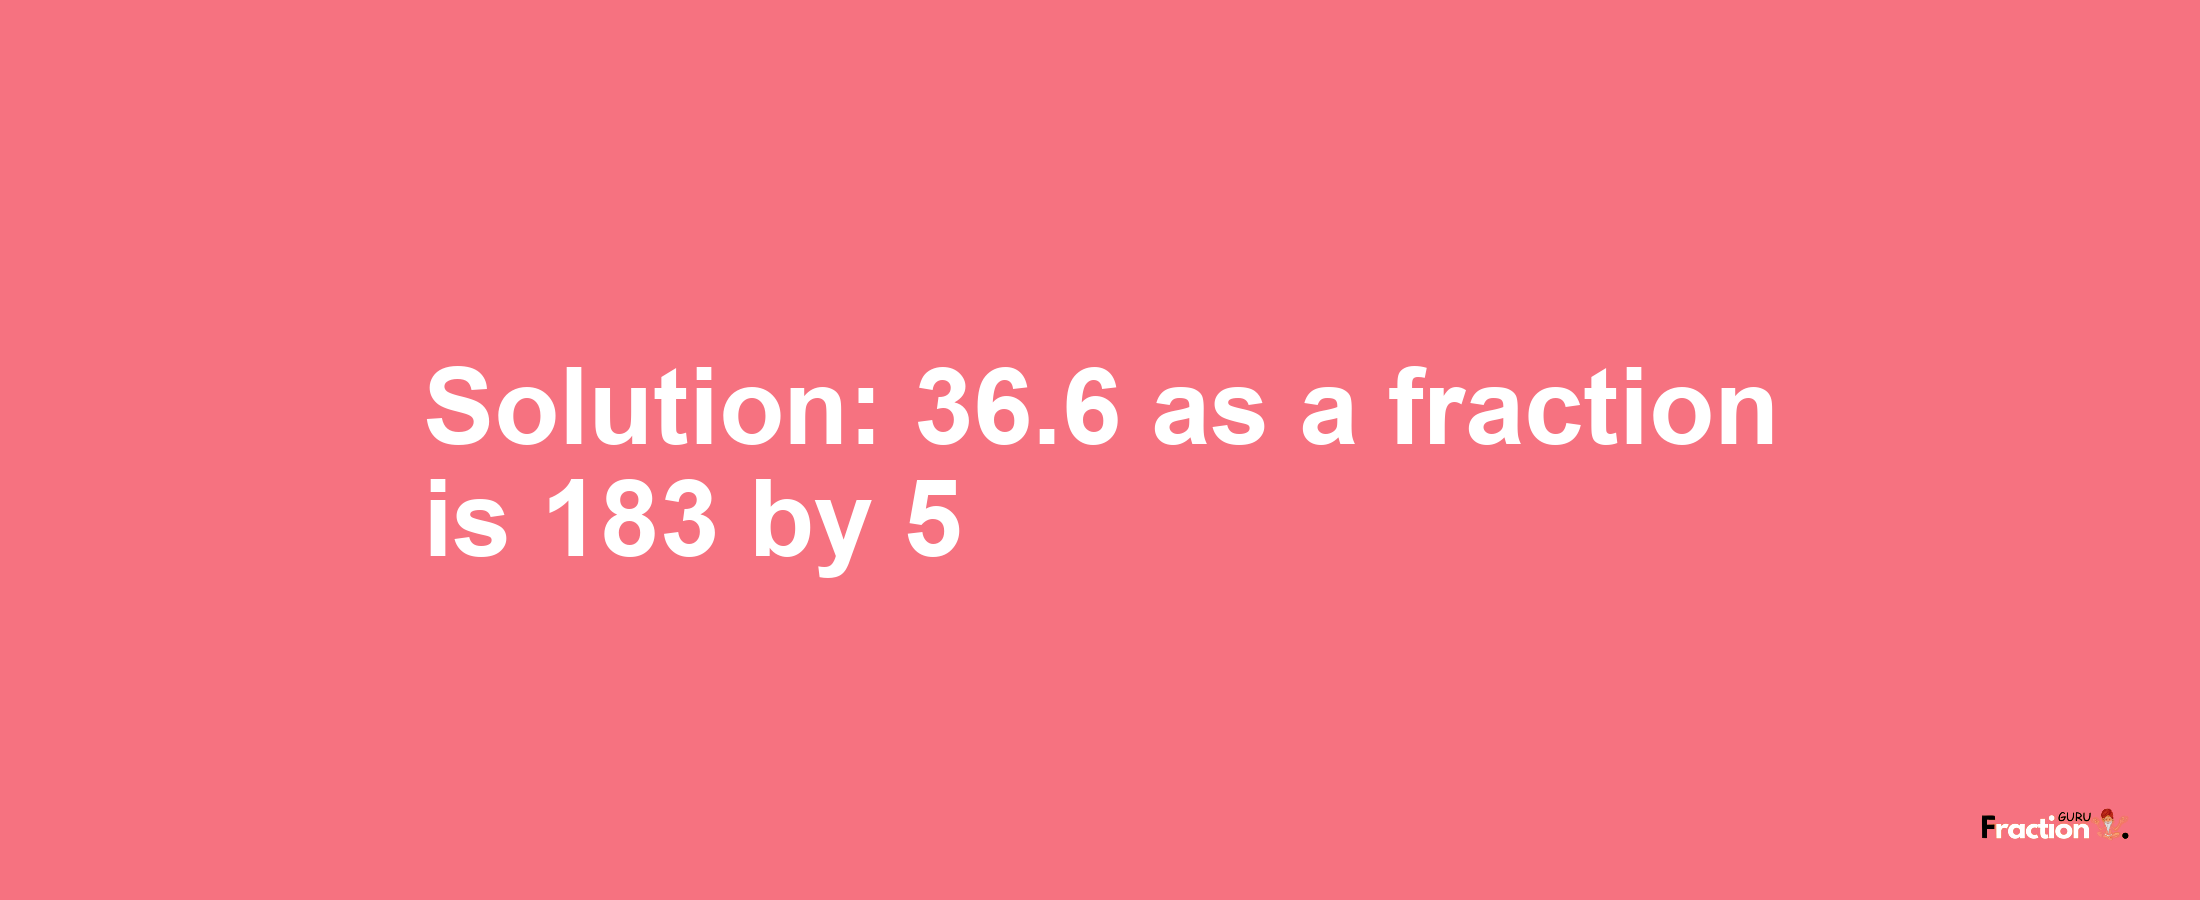 Solution:36.6 as a fraction is 183/5